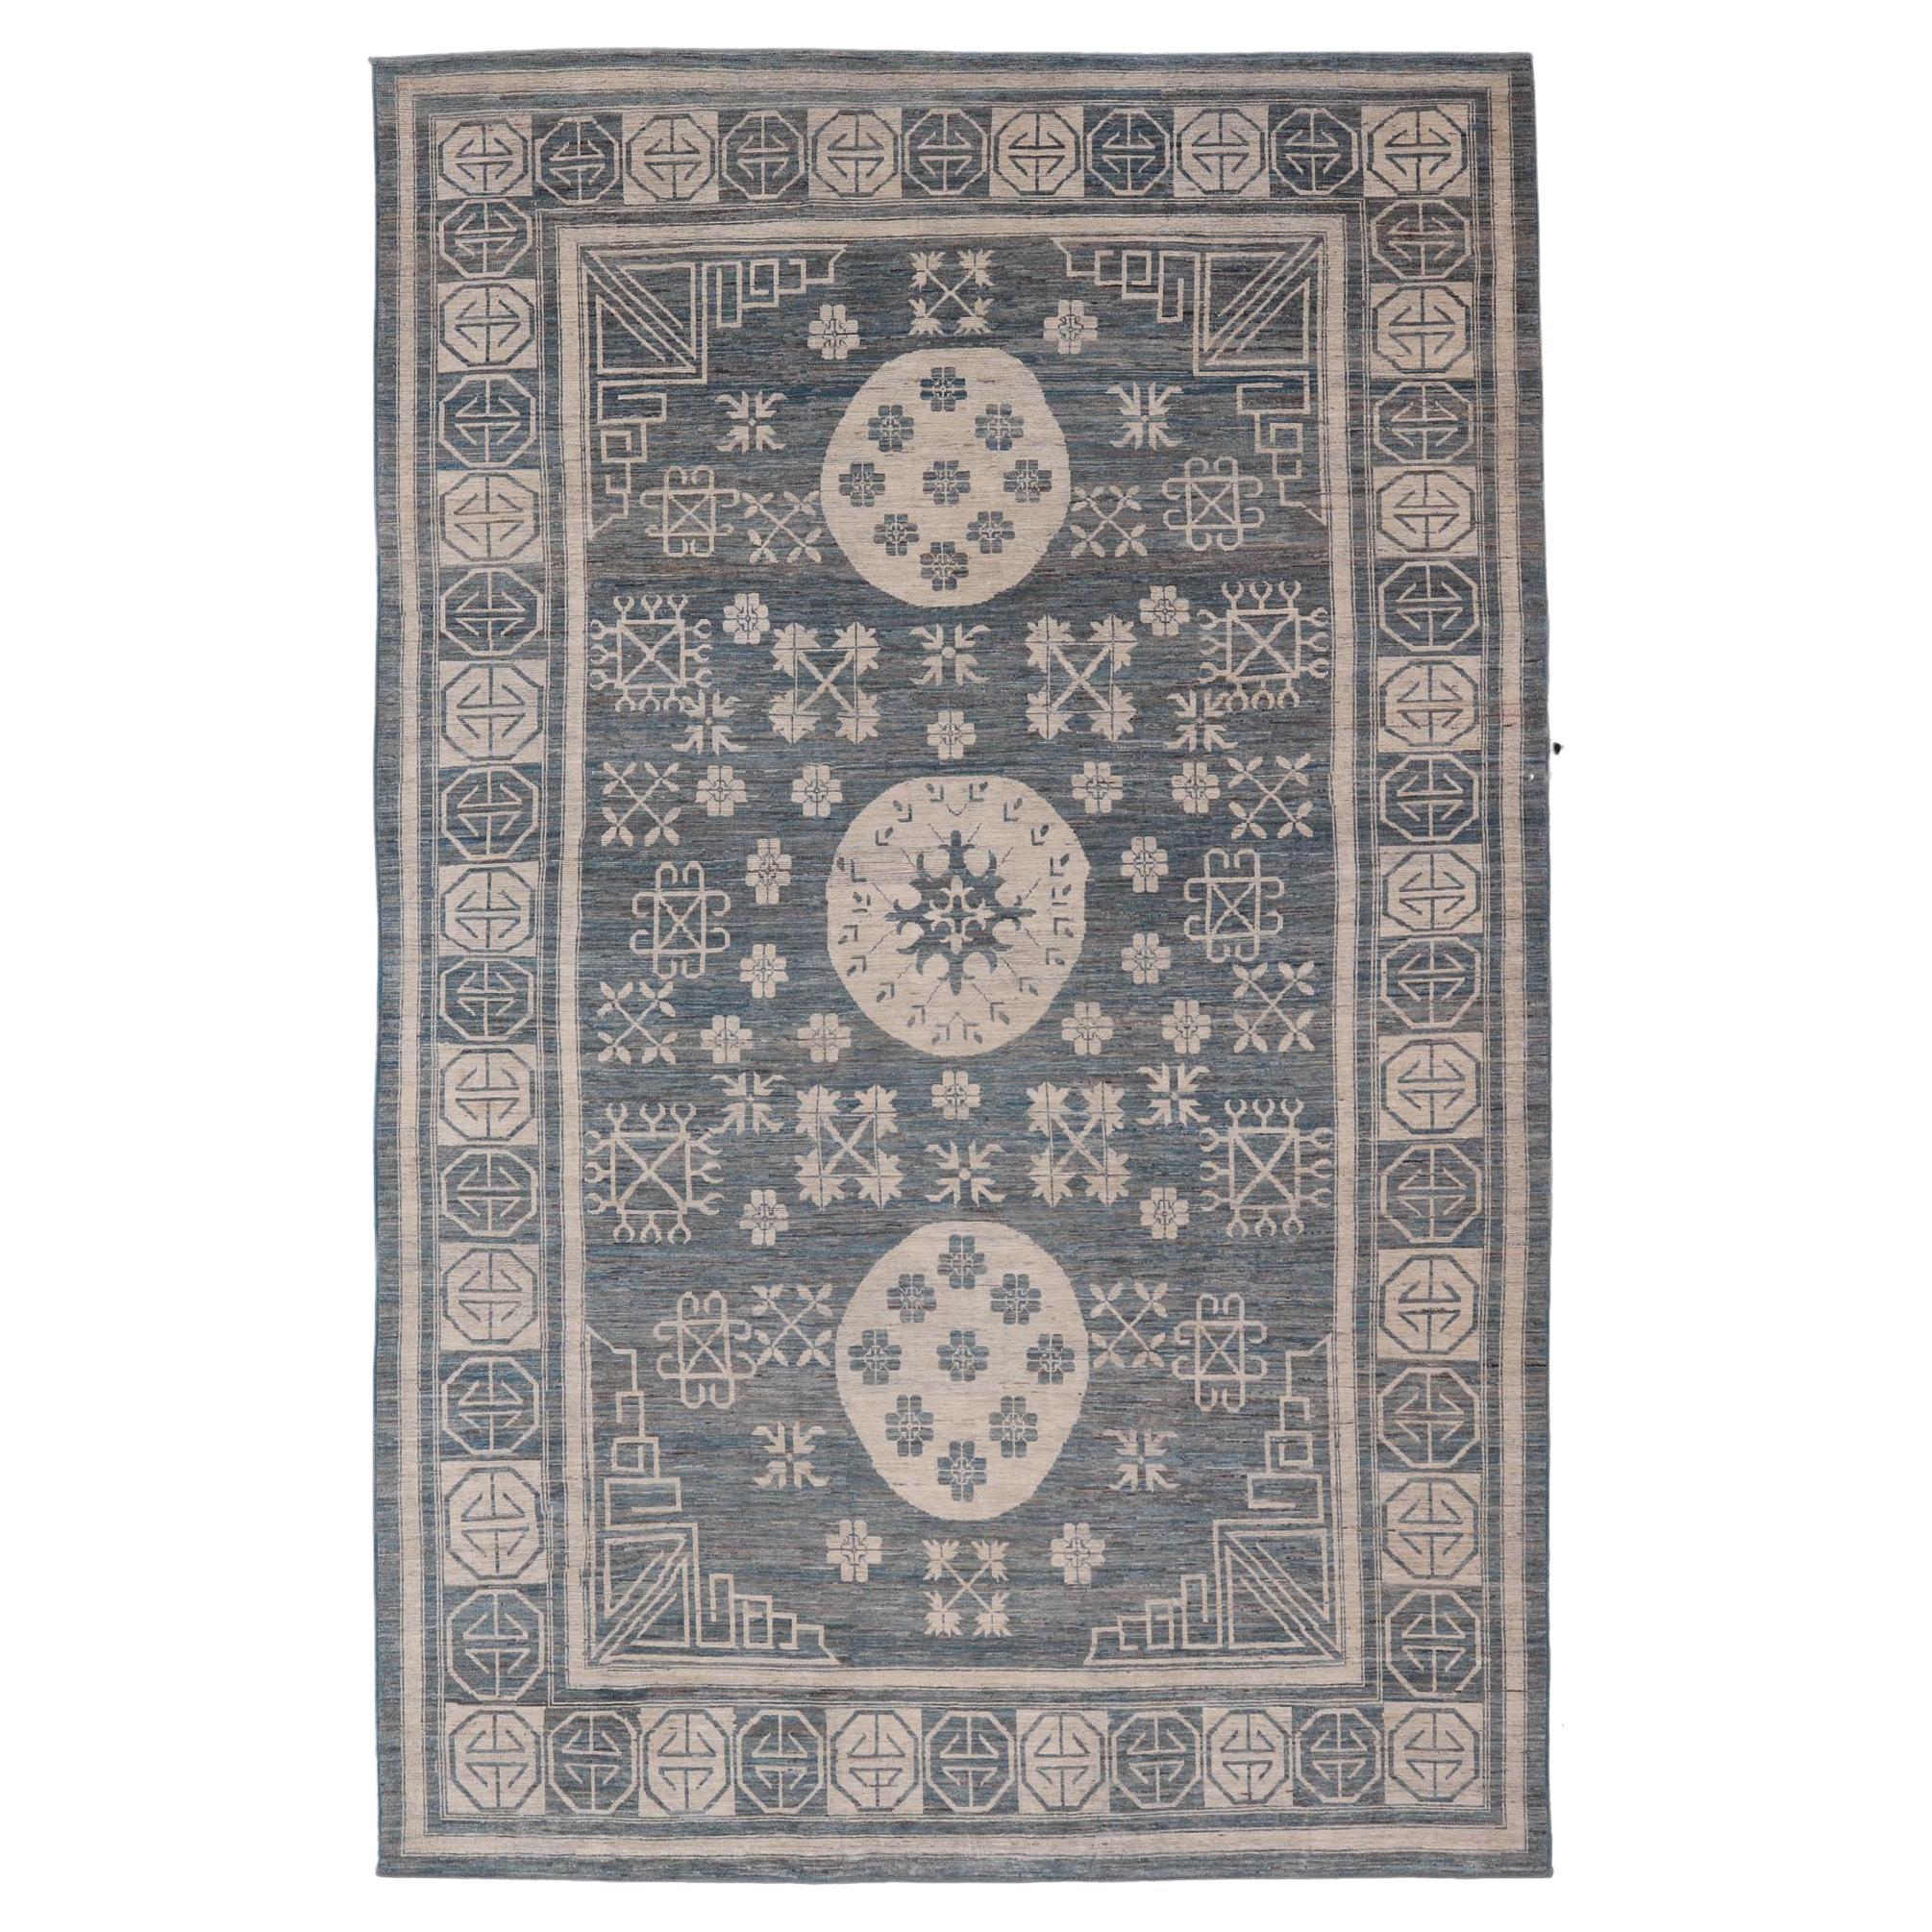 Modern Khotan Rug with Circular Medallions in Shades of Steel Blue & off White For Sale